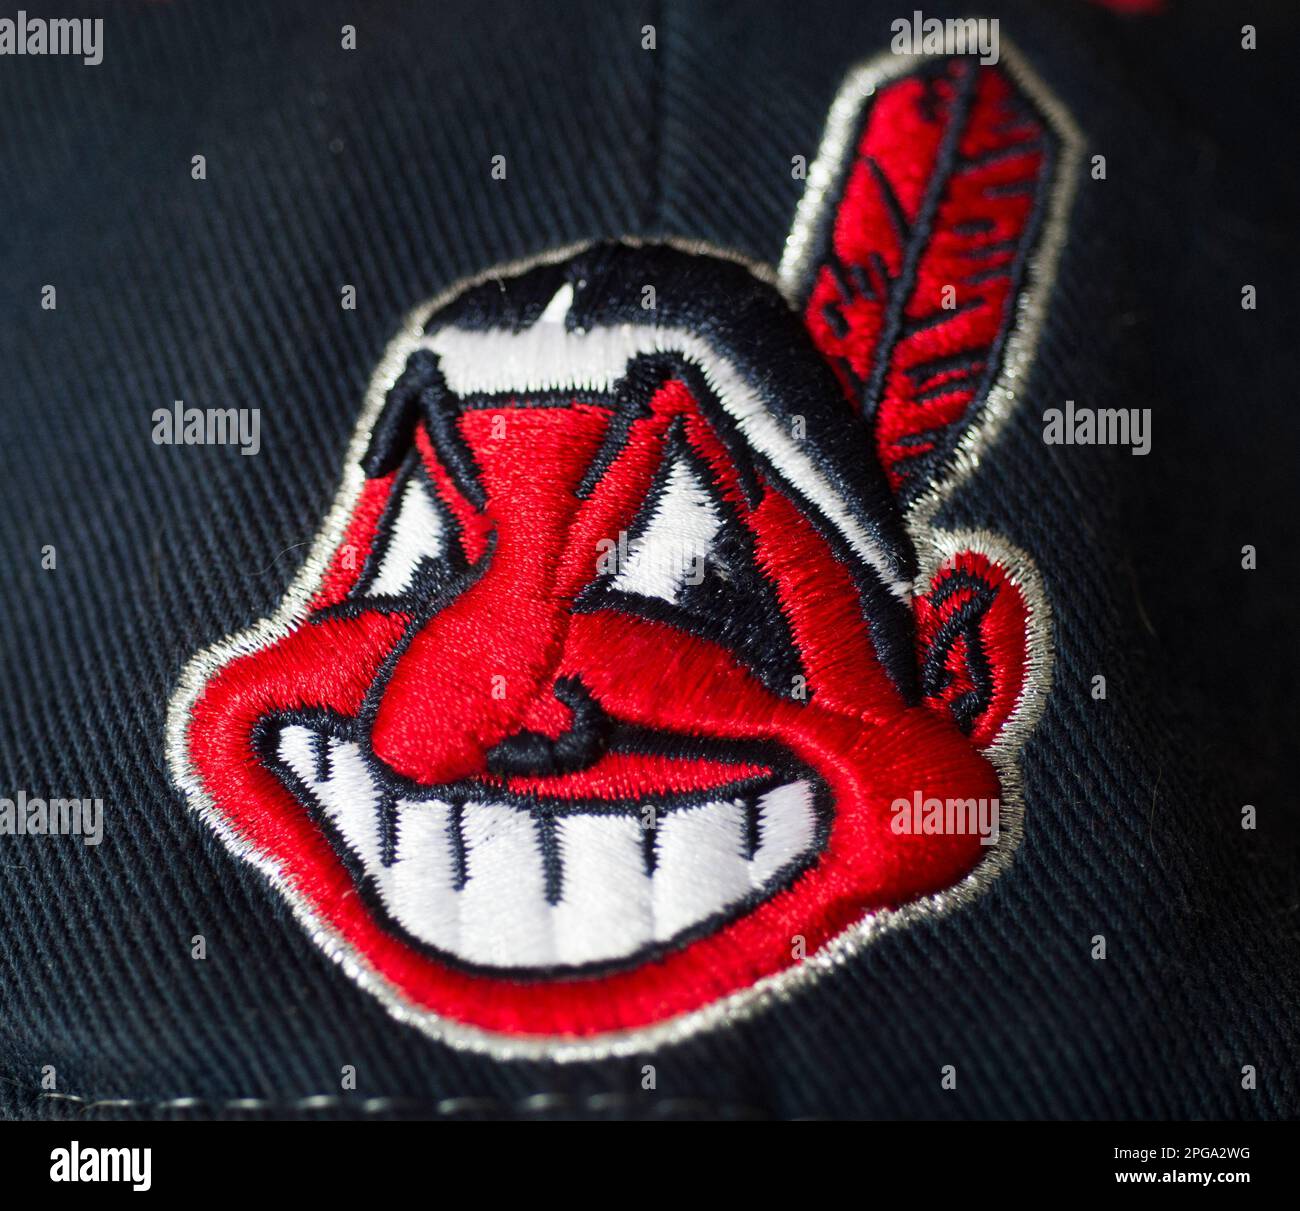 cleveland indians chief wahoo mascot